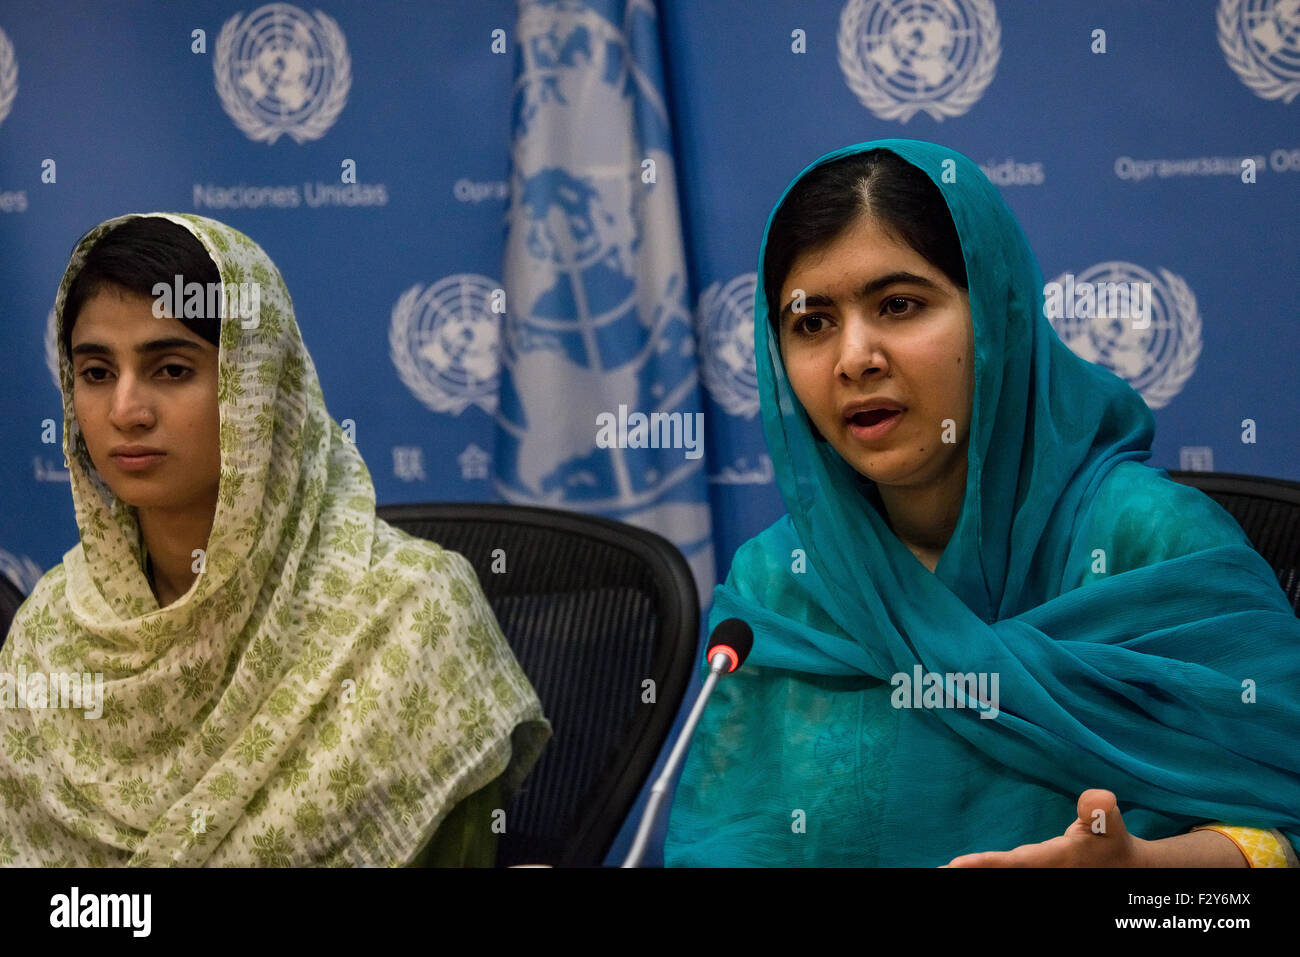 New York, United States. 22nd Sep, 2015. Malala Yousafzai (right), accompanied by four other young women, spoke at a press conference at the United Nations, emphasizing the need to expand educational opportunities in Pakistan. © Albin Lohr-Jones/Pacific Press/Alamy Live News Stock Photo